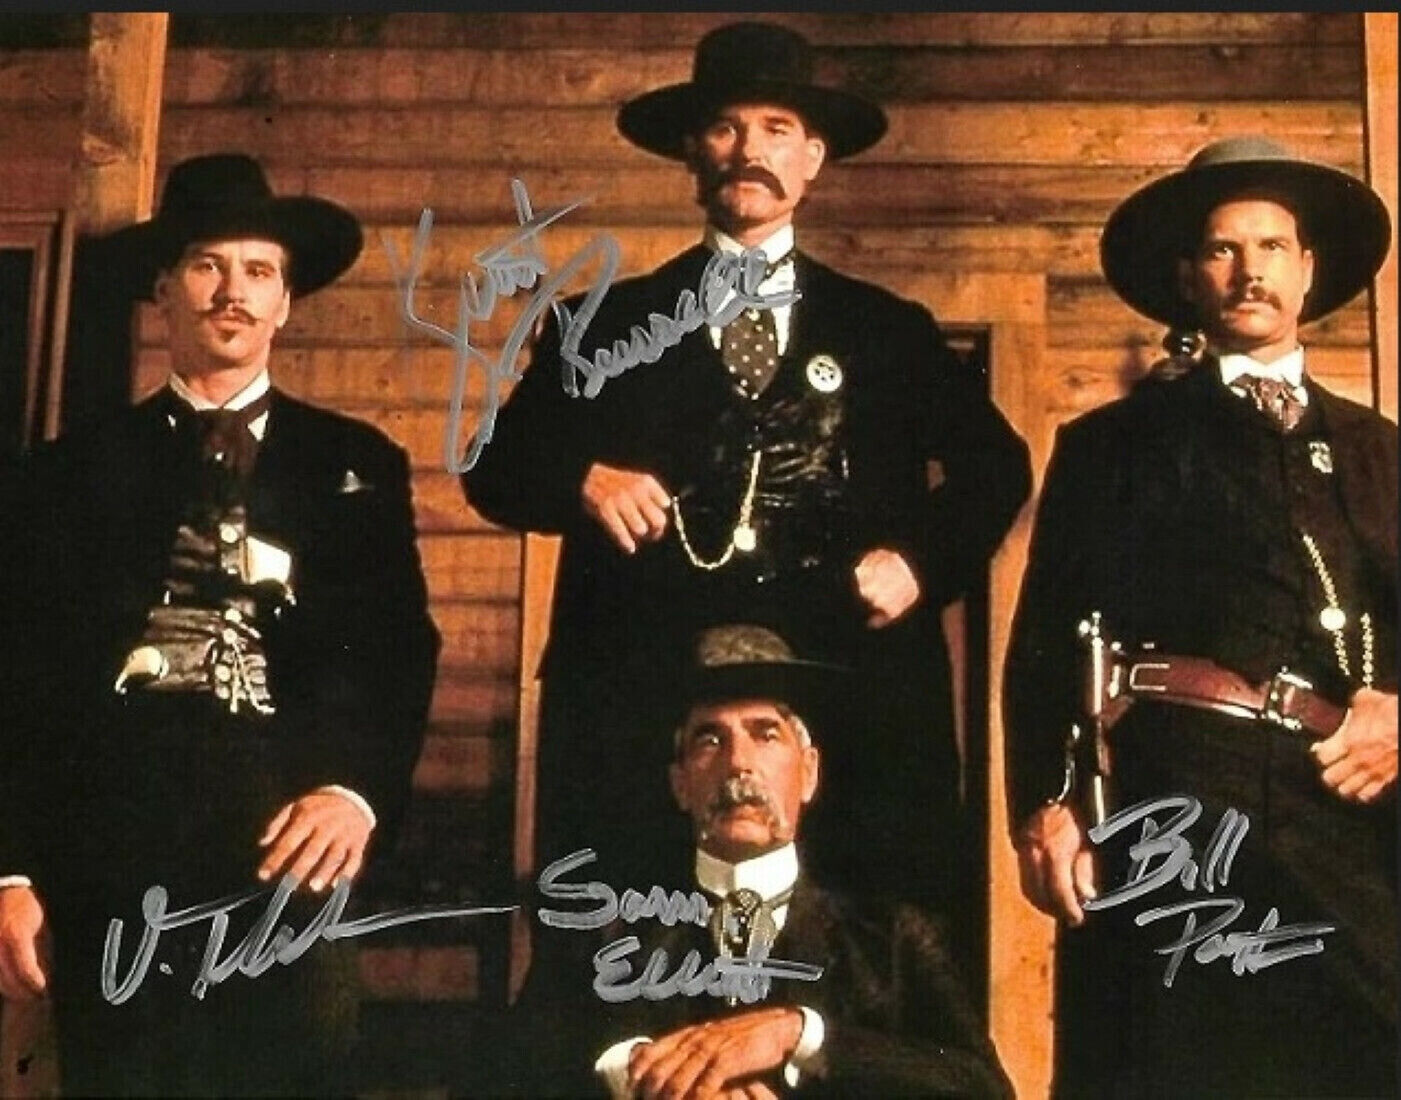 Tombstone Movie 8.5x11 Signed Photo Reprint